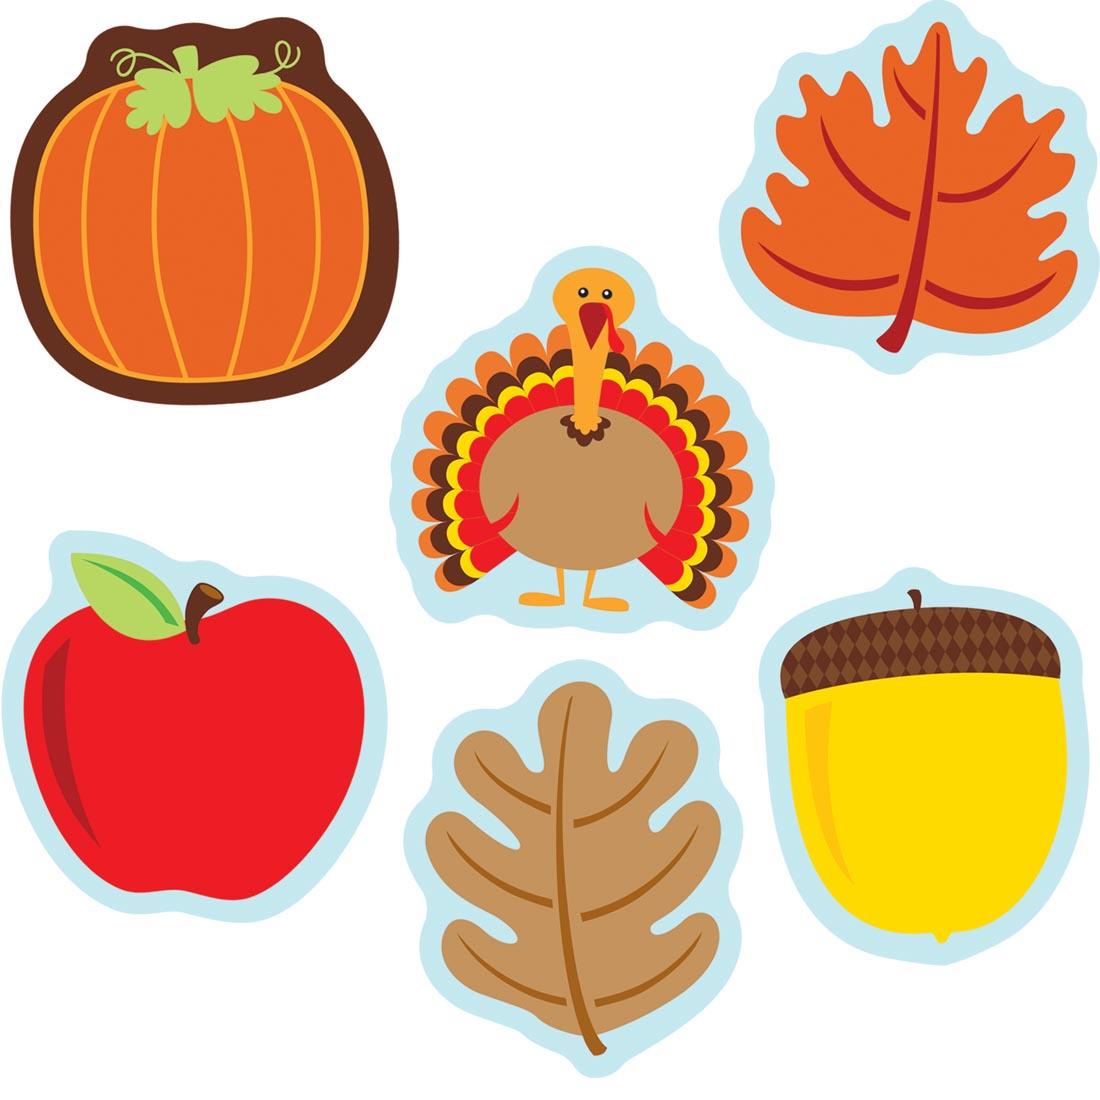 Pumpkin, Apple, Turkey, Acorn and Leaves are part of the Fall Mix Mini Cut-Outs by Carson Dellosa